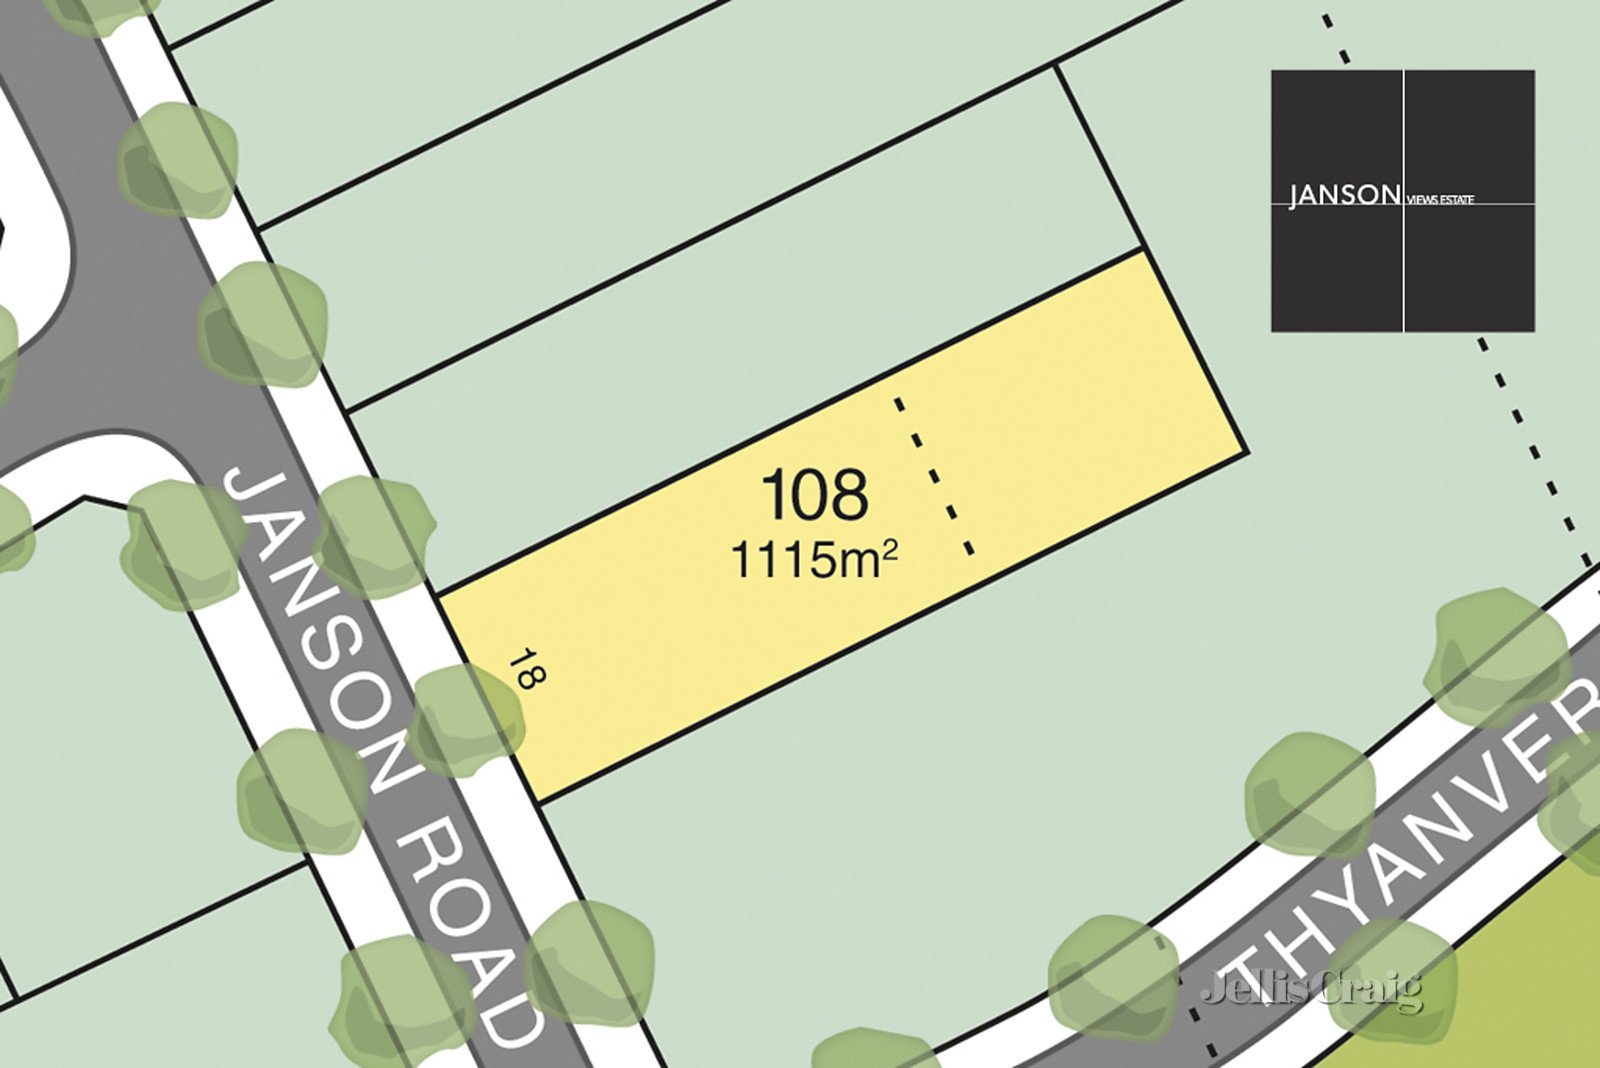 Lot 108 Janson Road, Brown Hill image 1